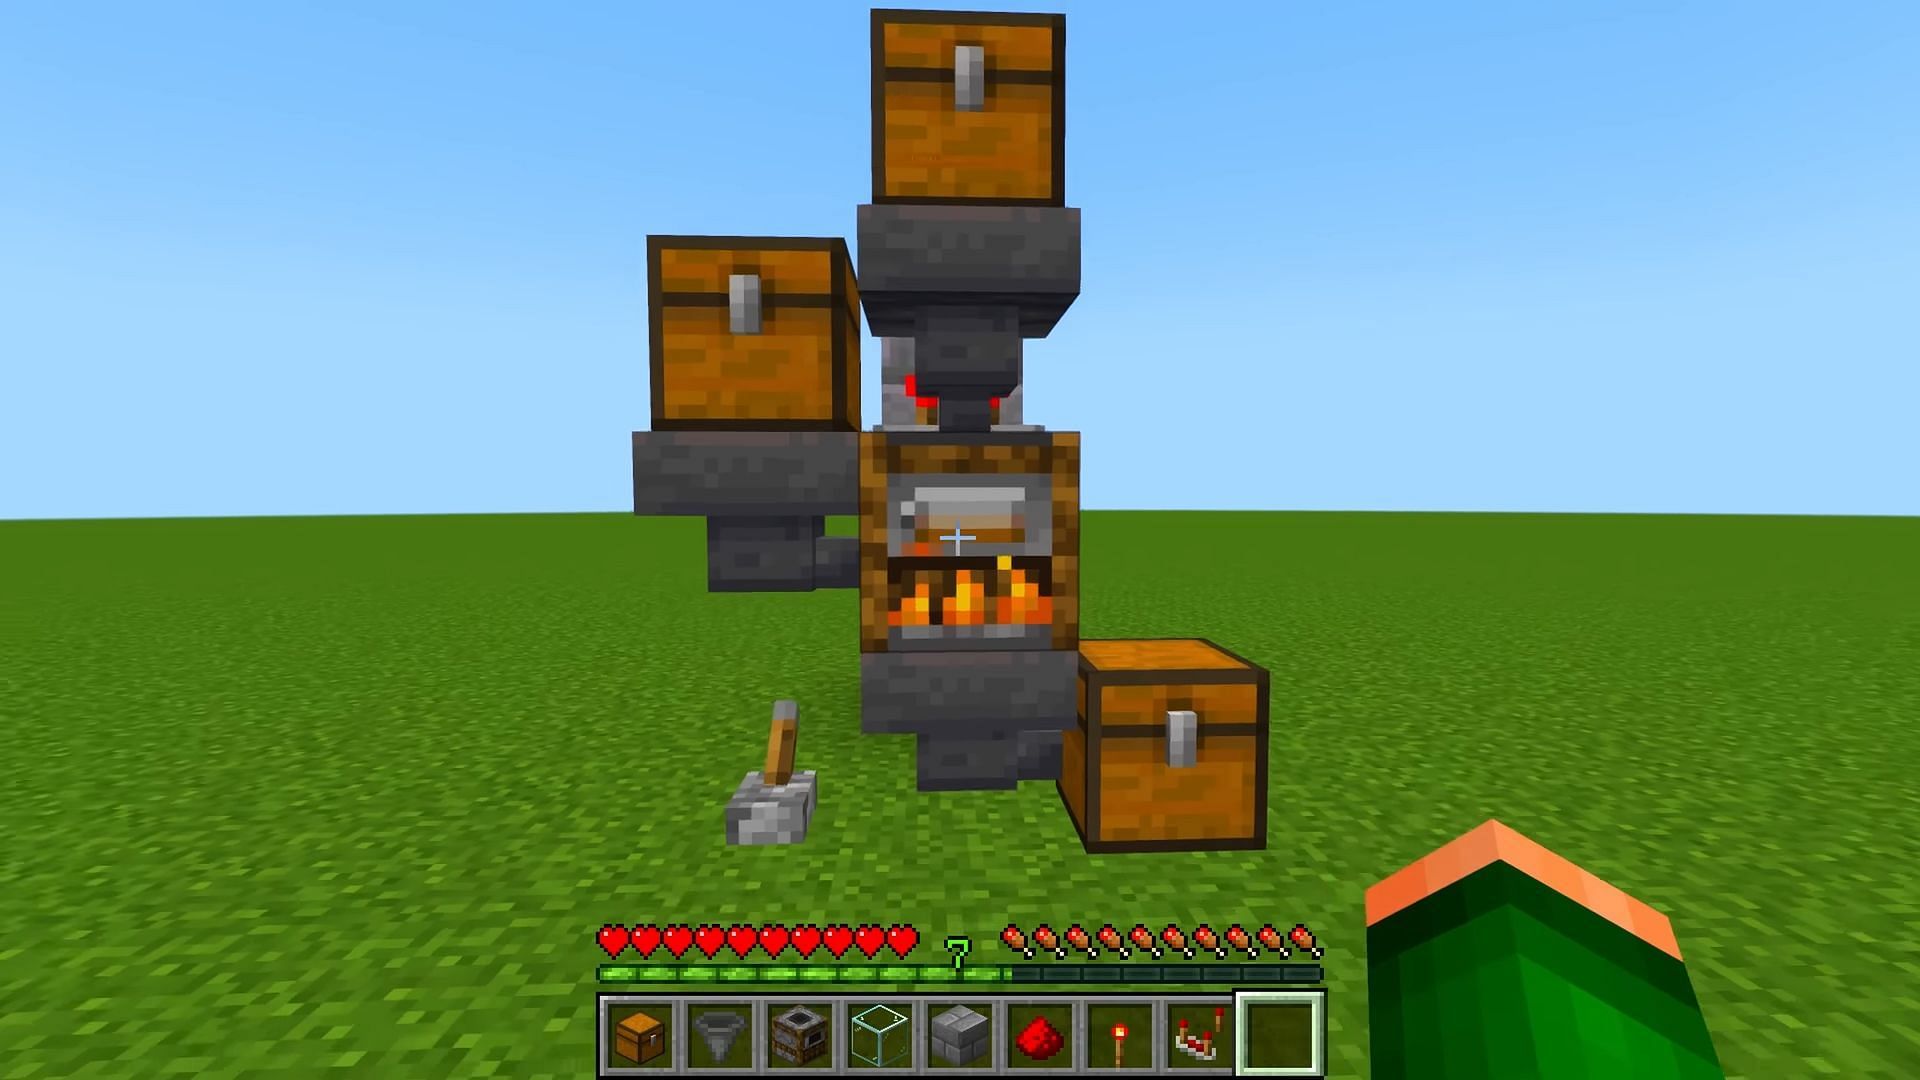 Baking potatoes is a great way to get XP in Minecraft (Image via Cubius/YouTube)